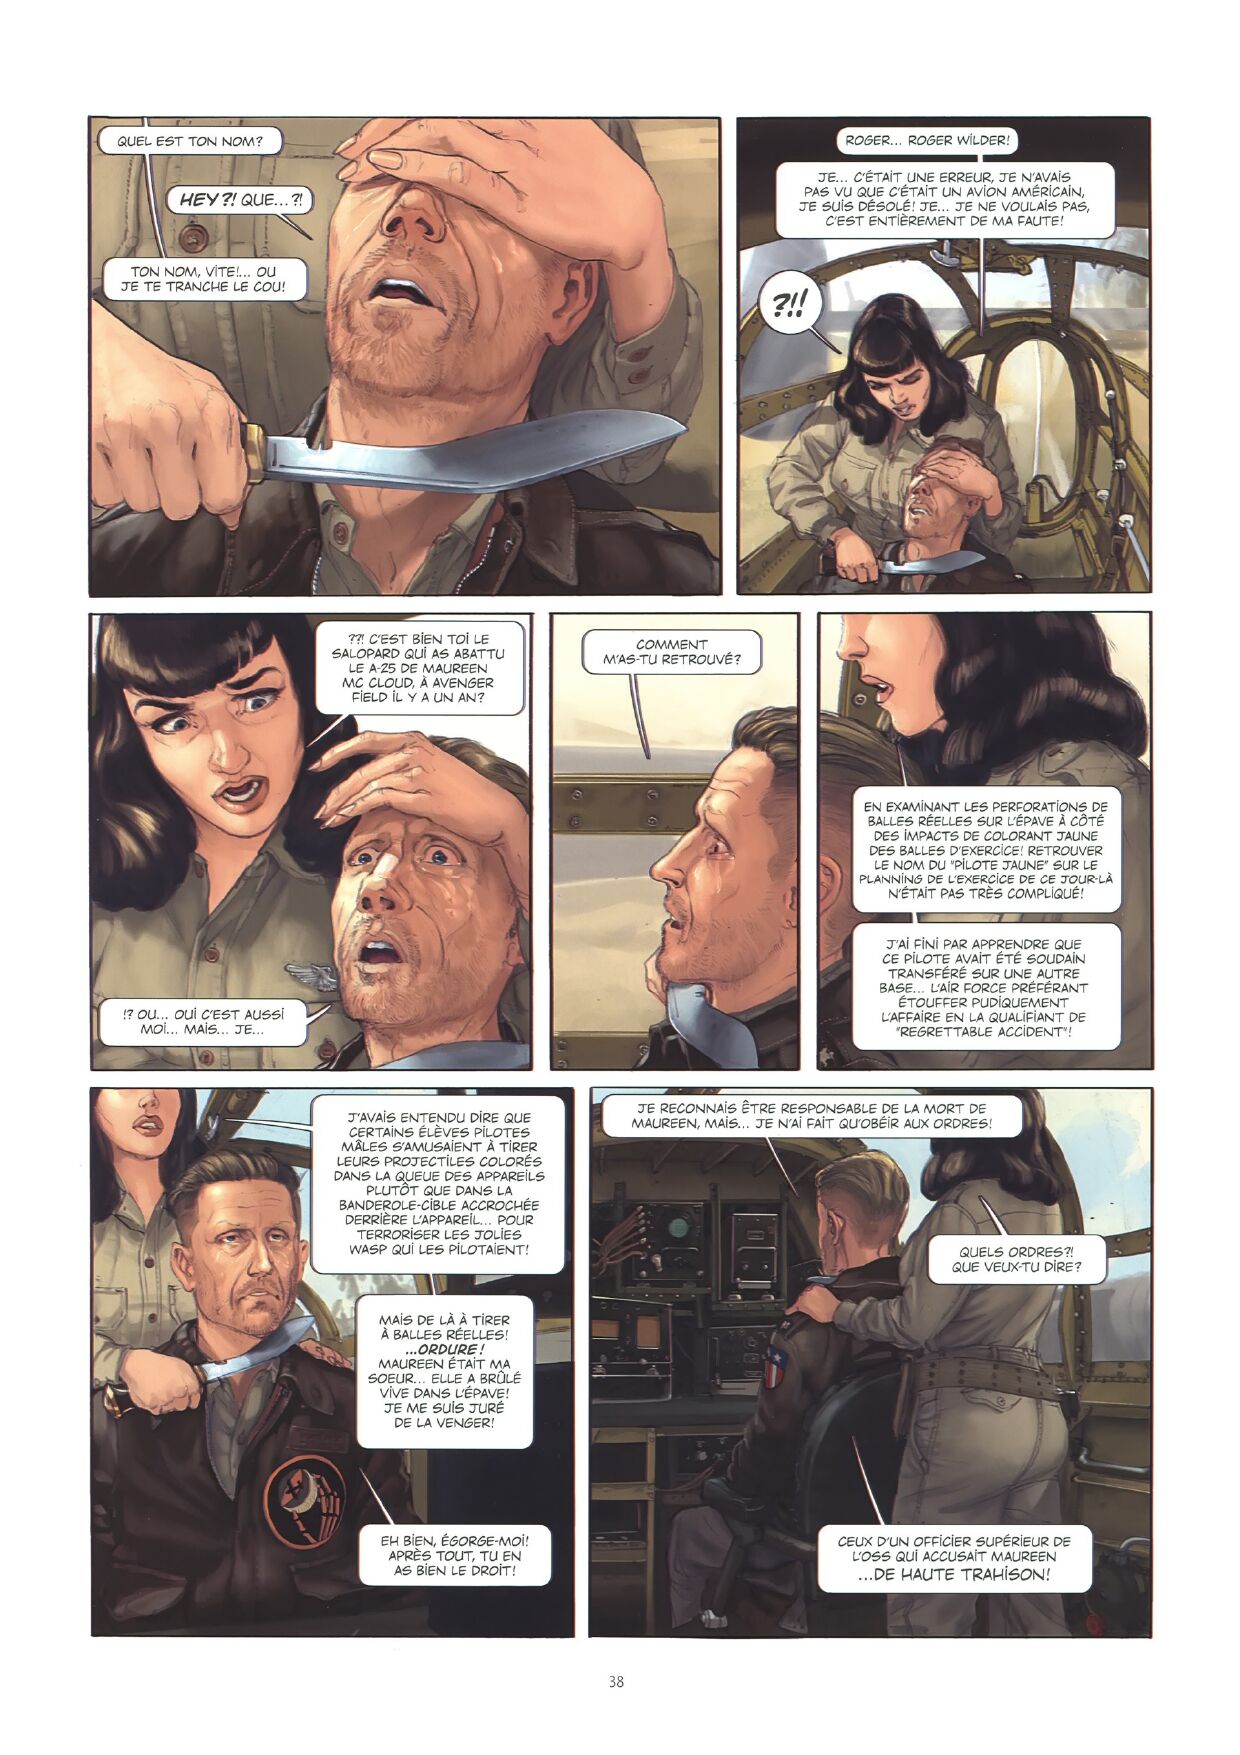 Angel Wings tome2 black widow numero d'image 39